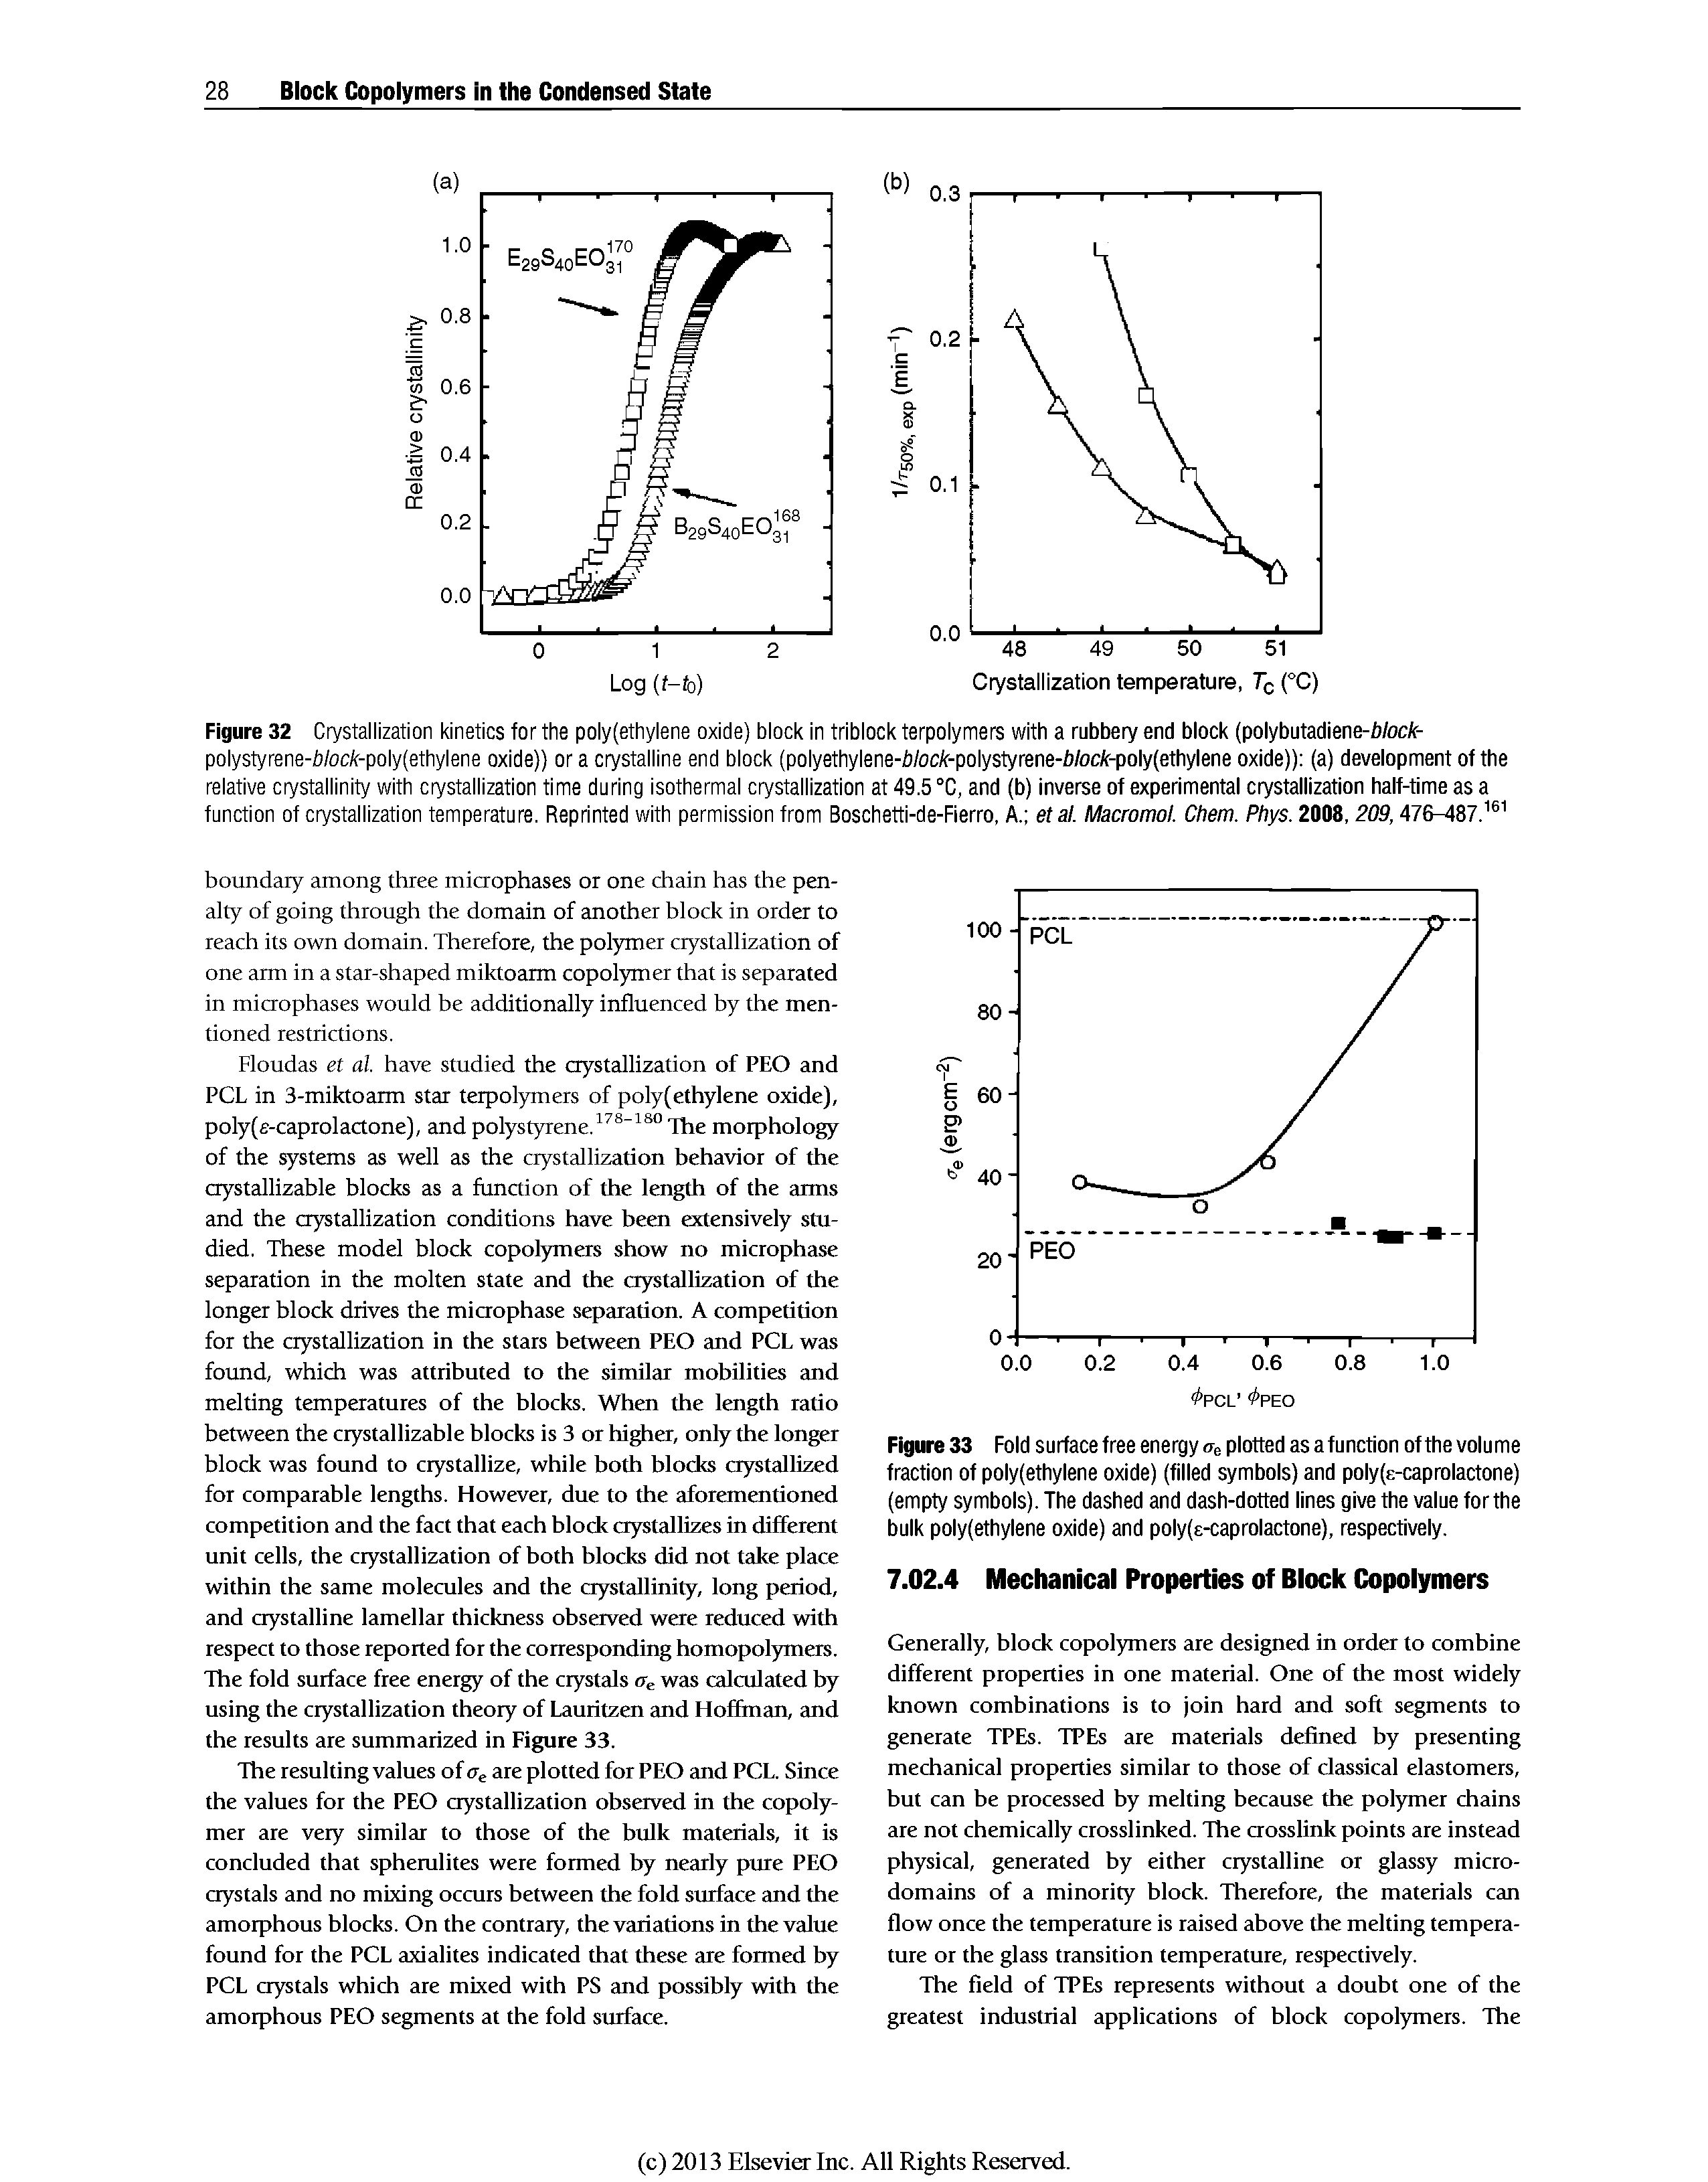 Figure 32 Crystallization kinetics for the poly(ethylene oxide) block in triblock terpolymers with a rubbery end biock (poiybutadiene-Wocfr-polystyrene-b/oc/f-poly(ethylene oxide)) or a crystalline end block (polyethylene-b/oc/f-polystyrene-Wock -poiy(ethylene oxide)) (a) deveiopment of the relative crystallinity with crystallization time during isothermal crystallization at 49.5 °C, and (b) inverse of experimentai crystaiiization haif-time as a function of crystallization temperature. Reprinted with permission from Boschetti-de-Fierro, A. etal. Macromol. Chem. Phys. 2008,209,476- 87. ...